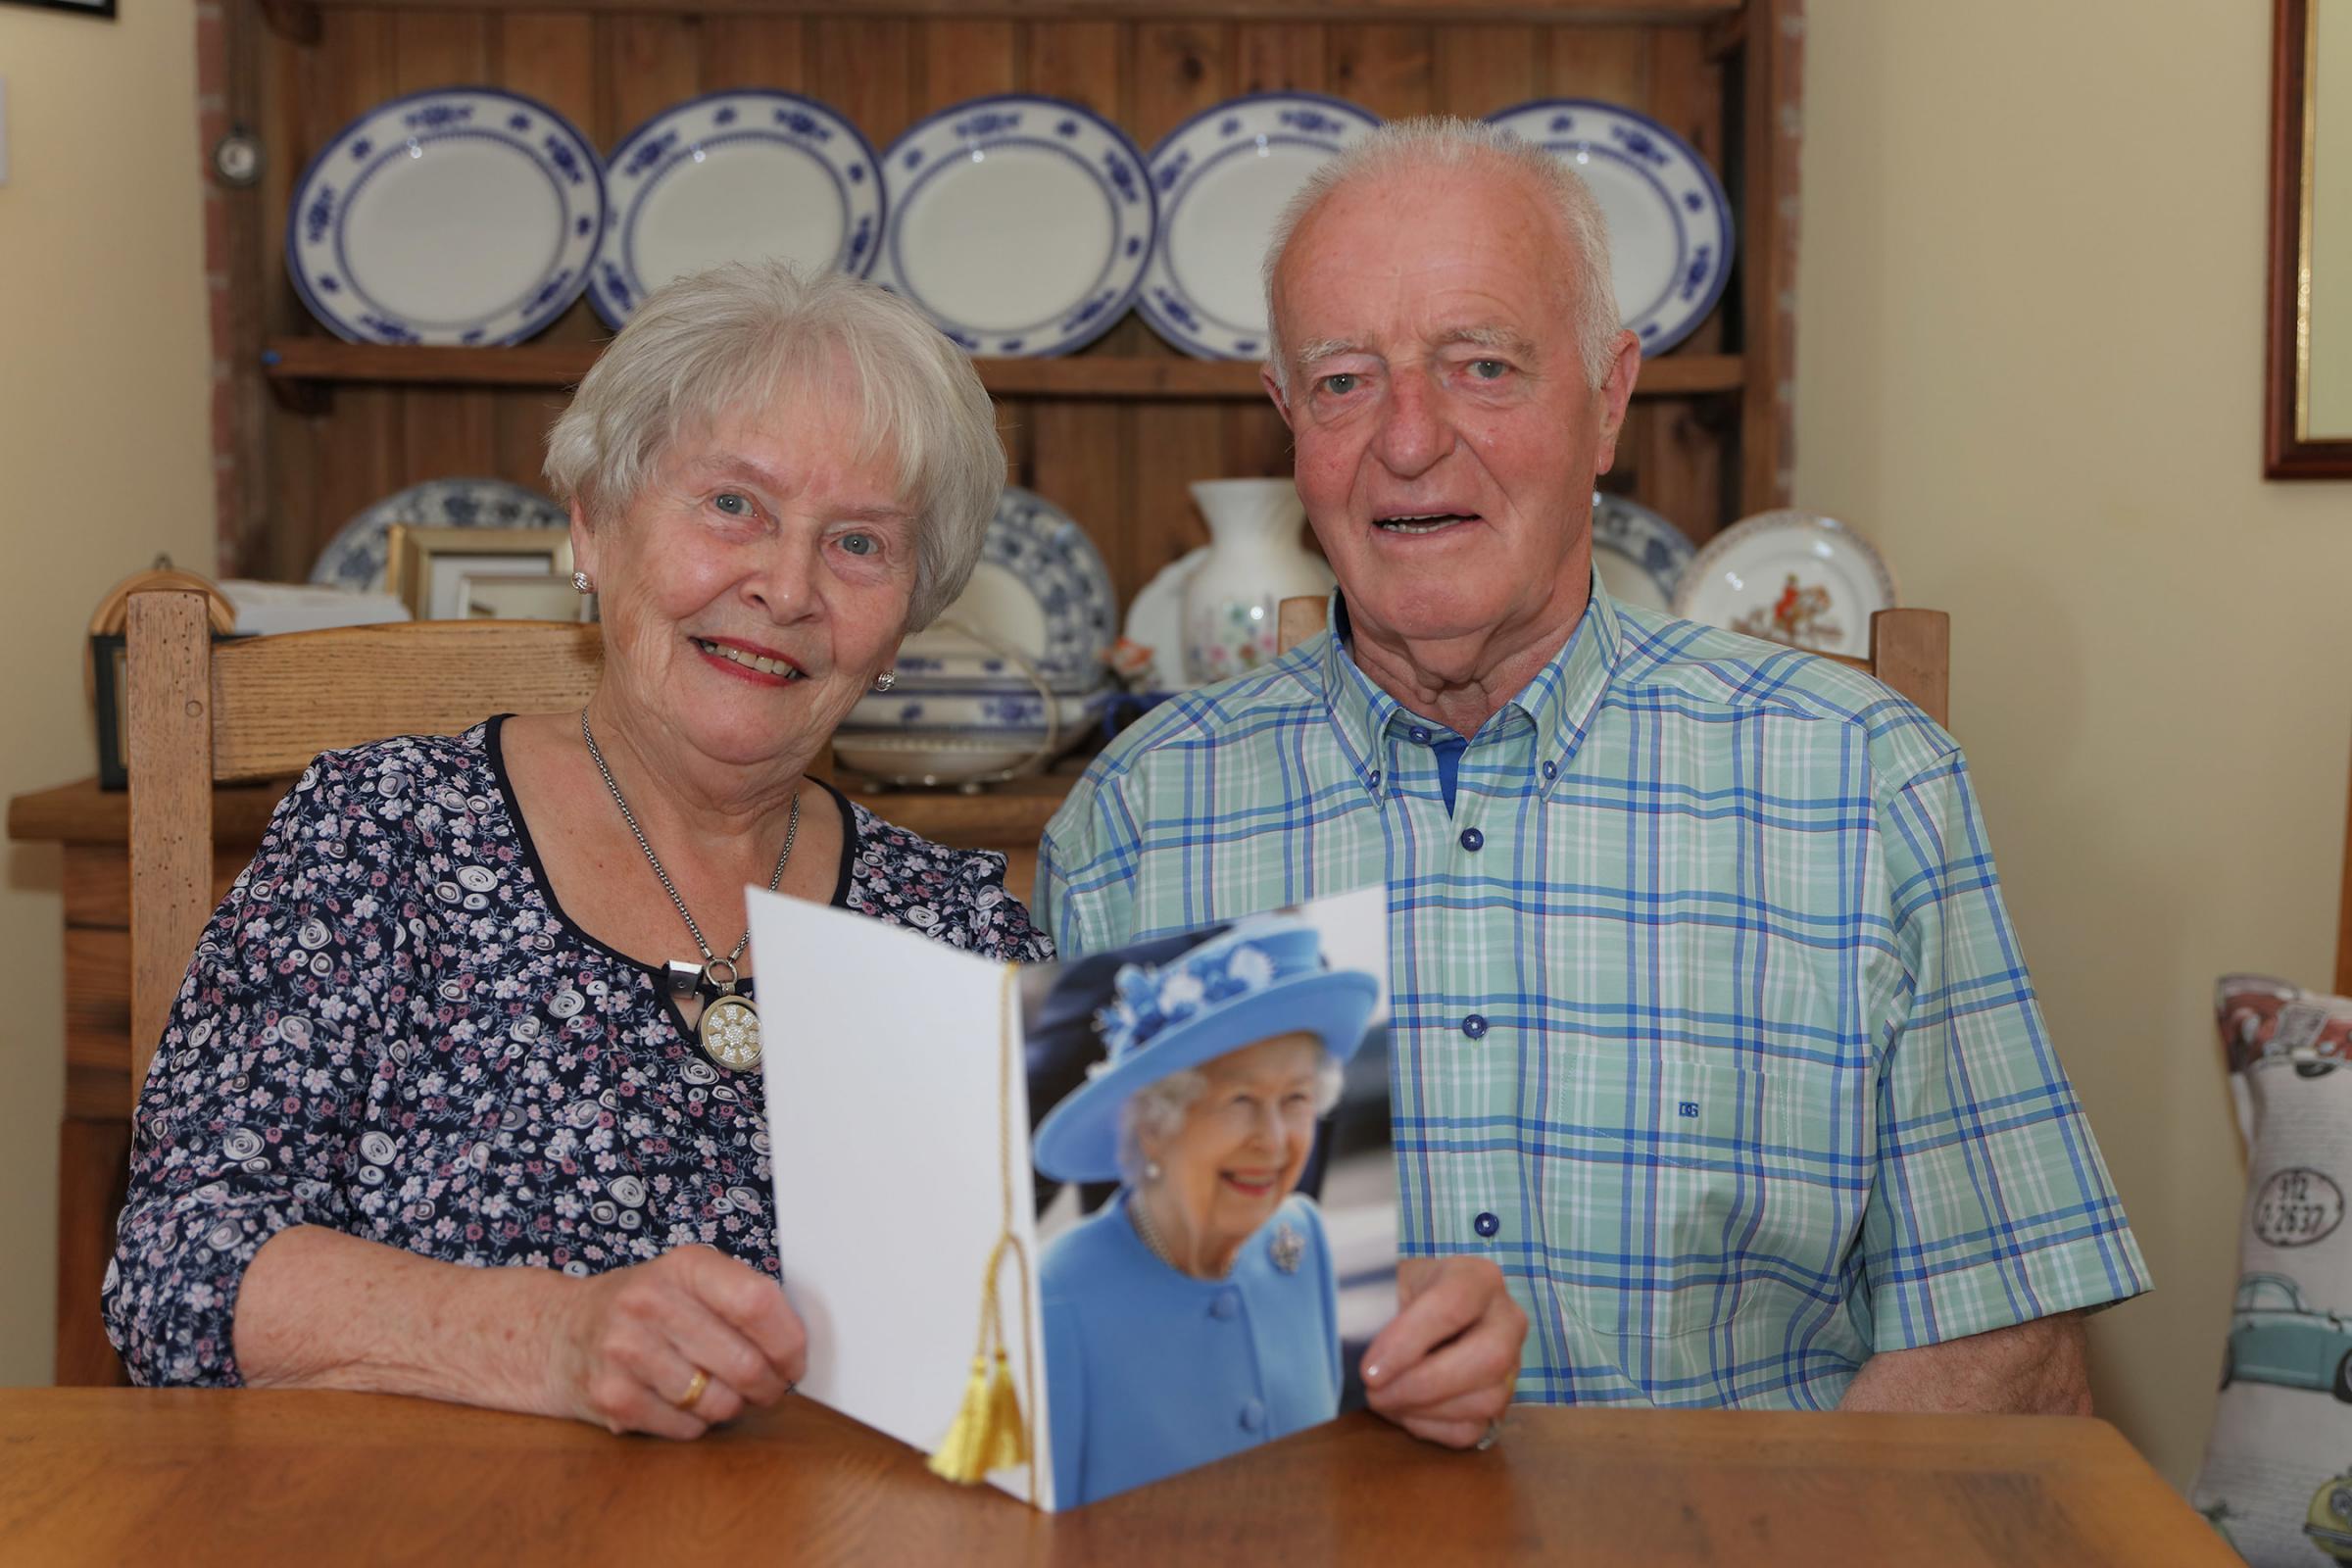 Doris and Ernie Campbell who celebrated their 60th wedding anniversary with a card from the Queen to mark the occasion. Photo: Trevor Armstrong